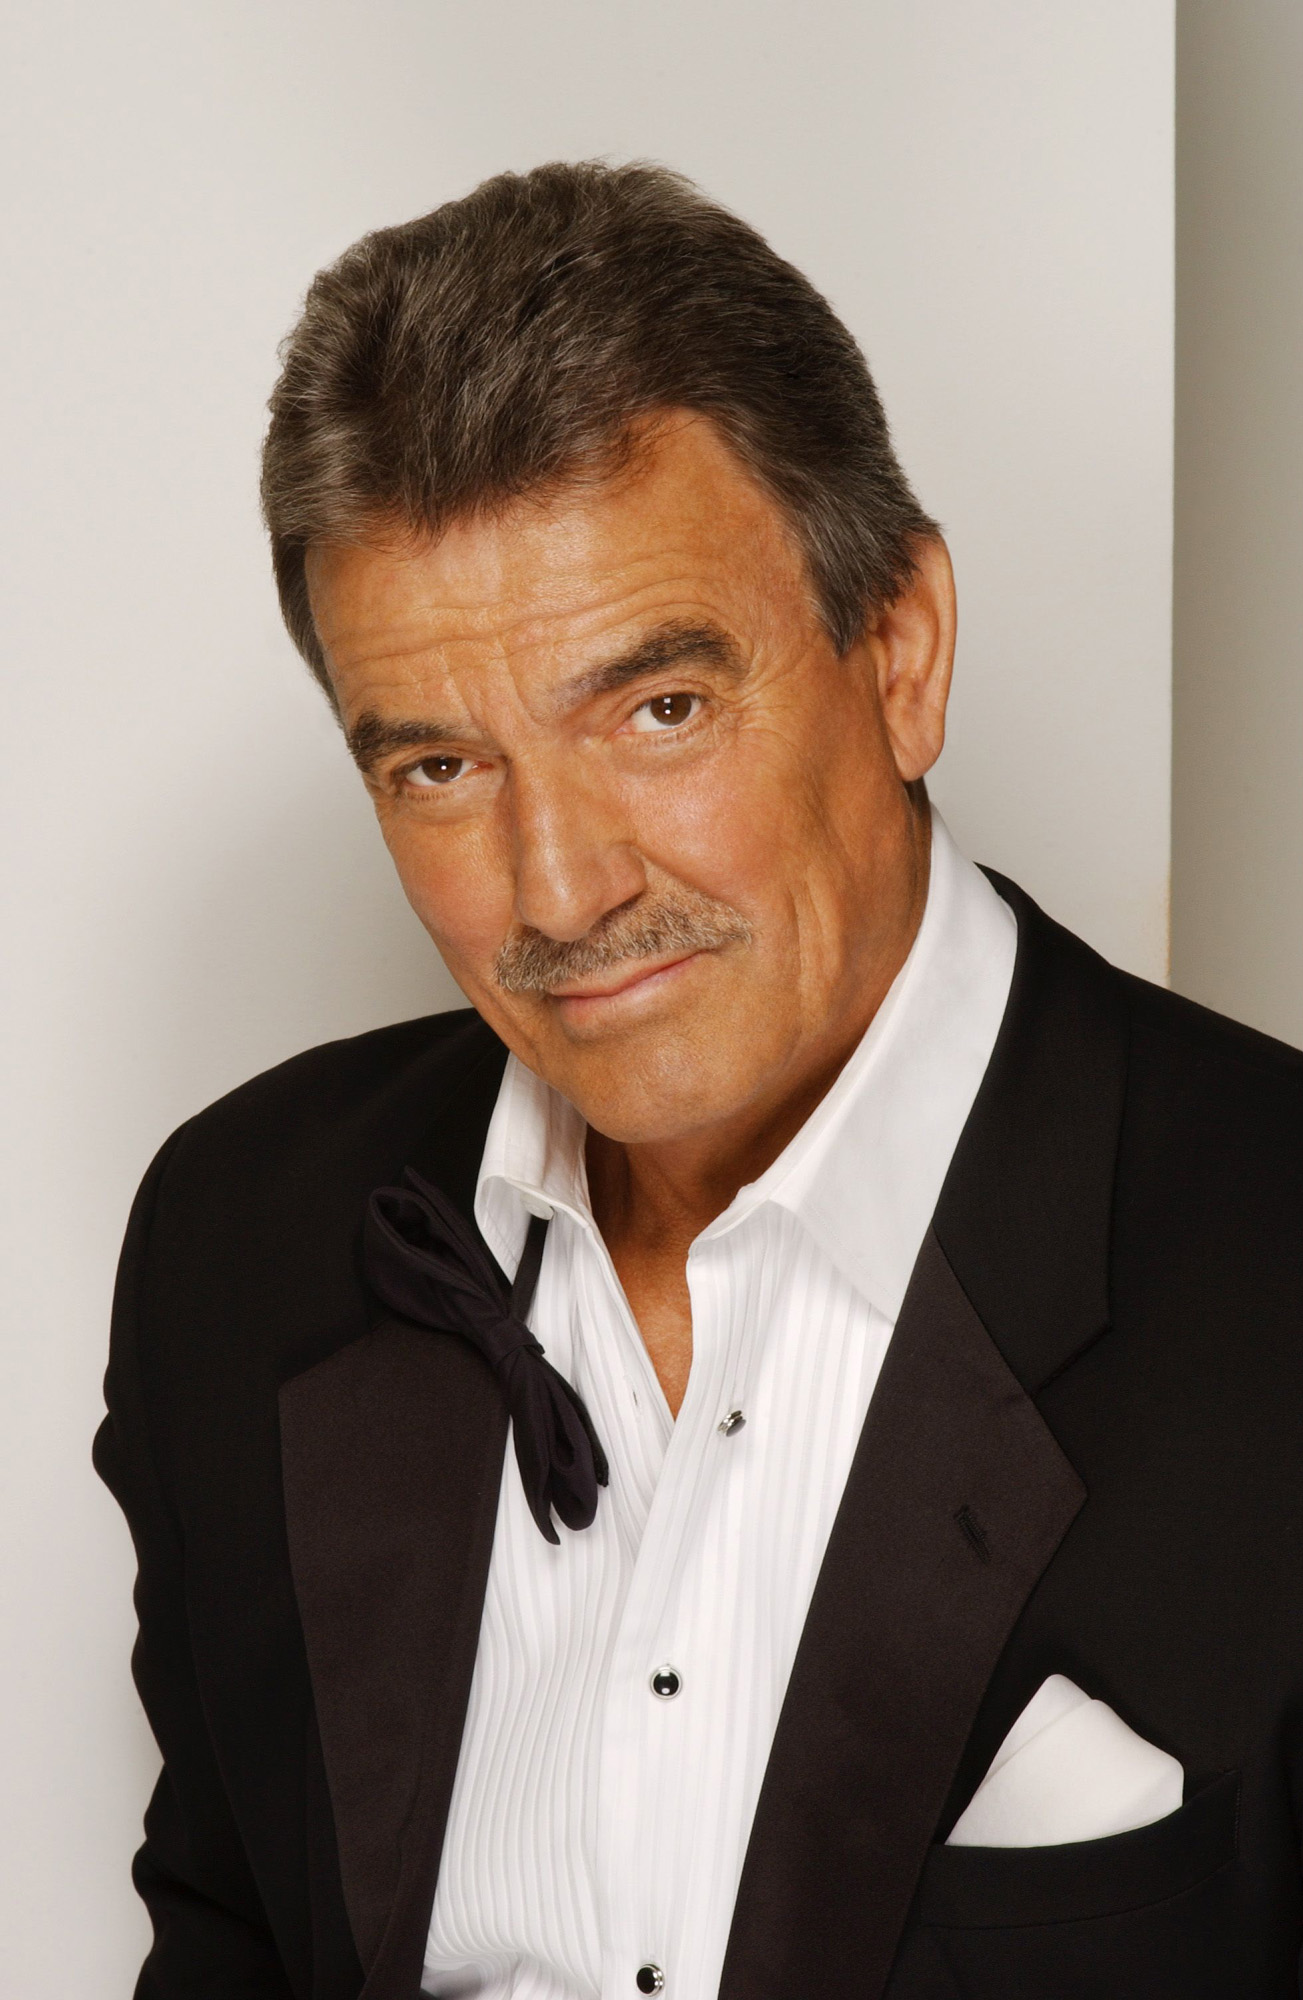 Eric Braeden as "Victor Newman" in the CBS daytime drama "The Young and the Restless" on the CBS Television Network | Source: Getty Images